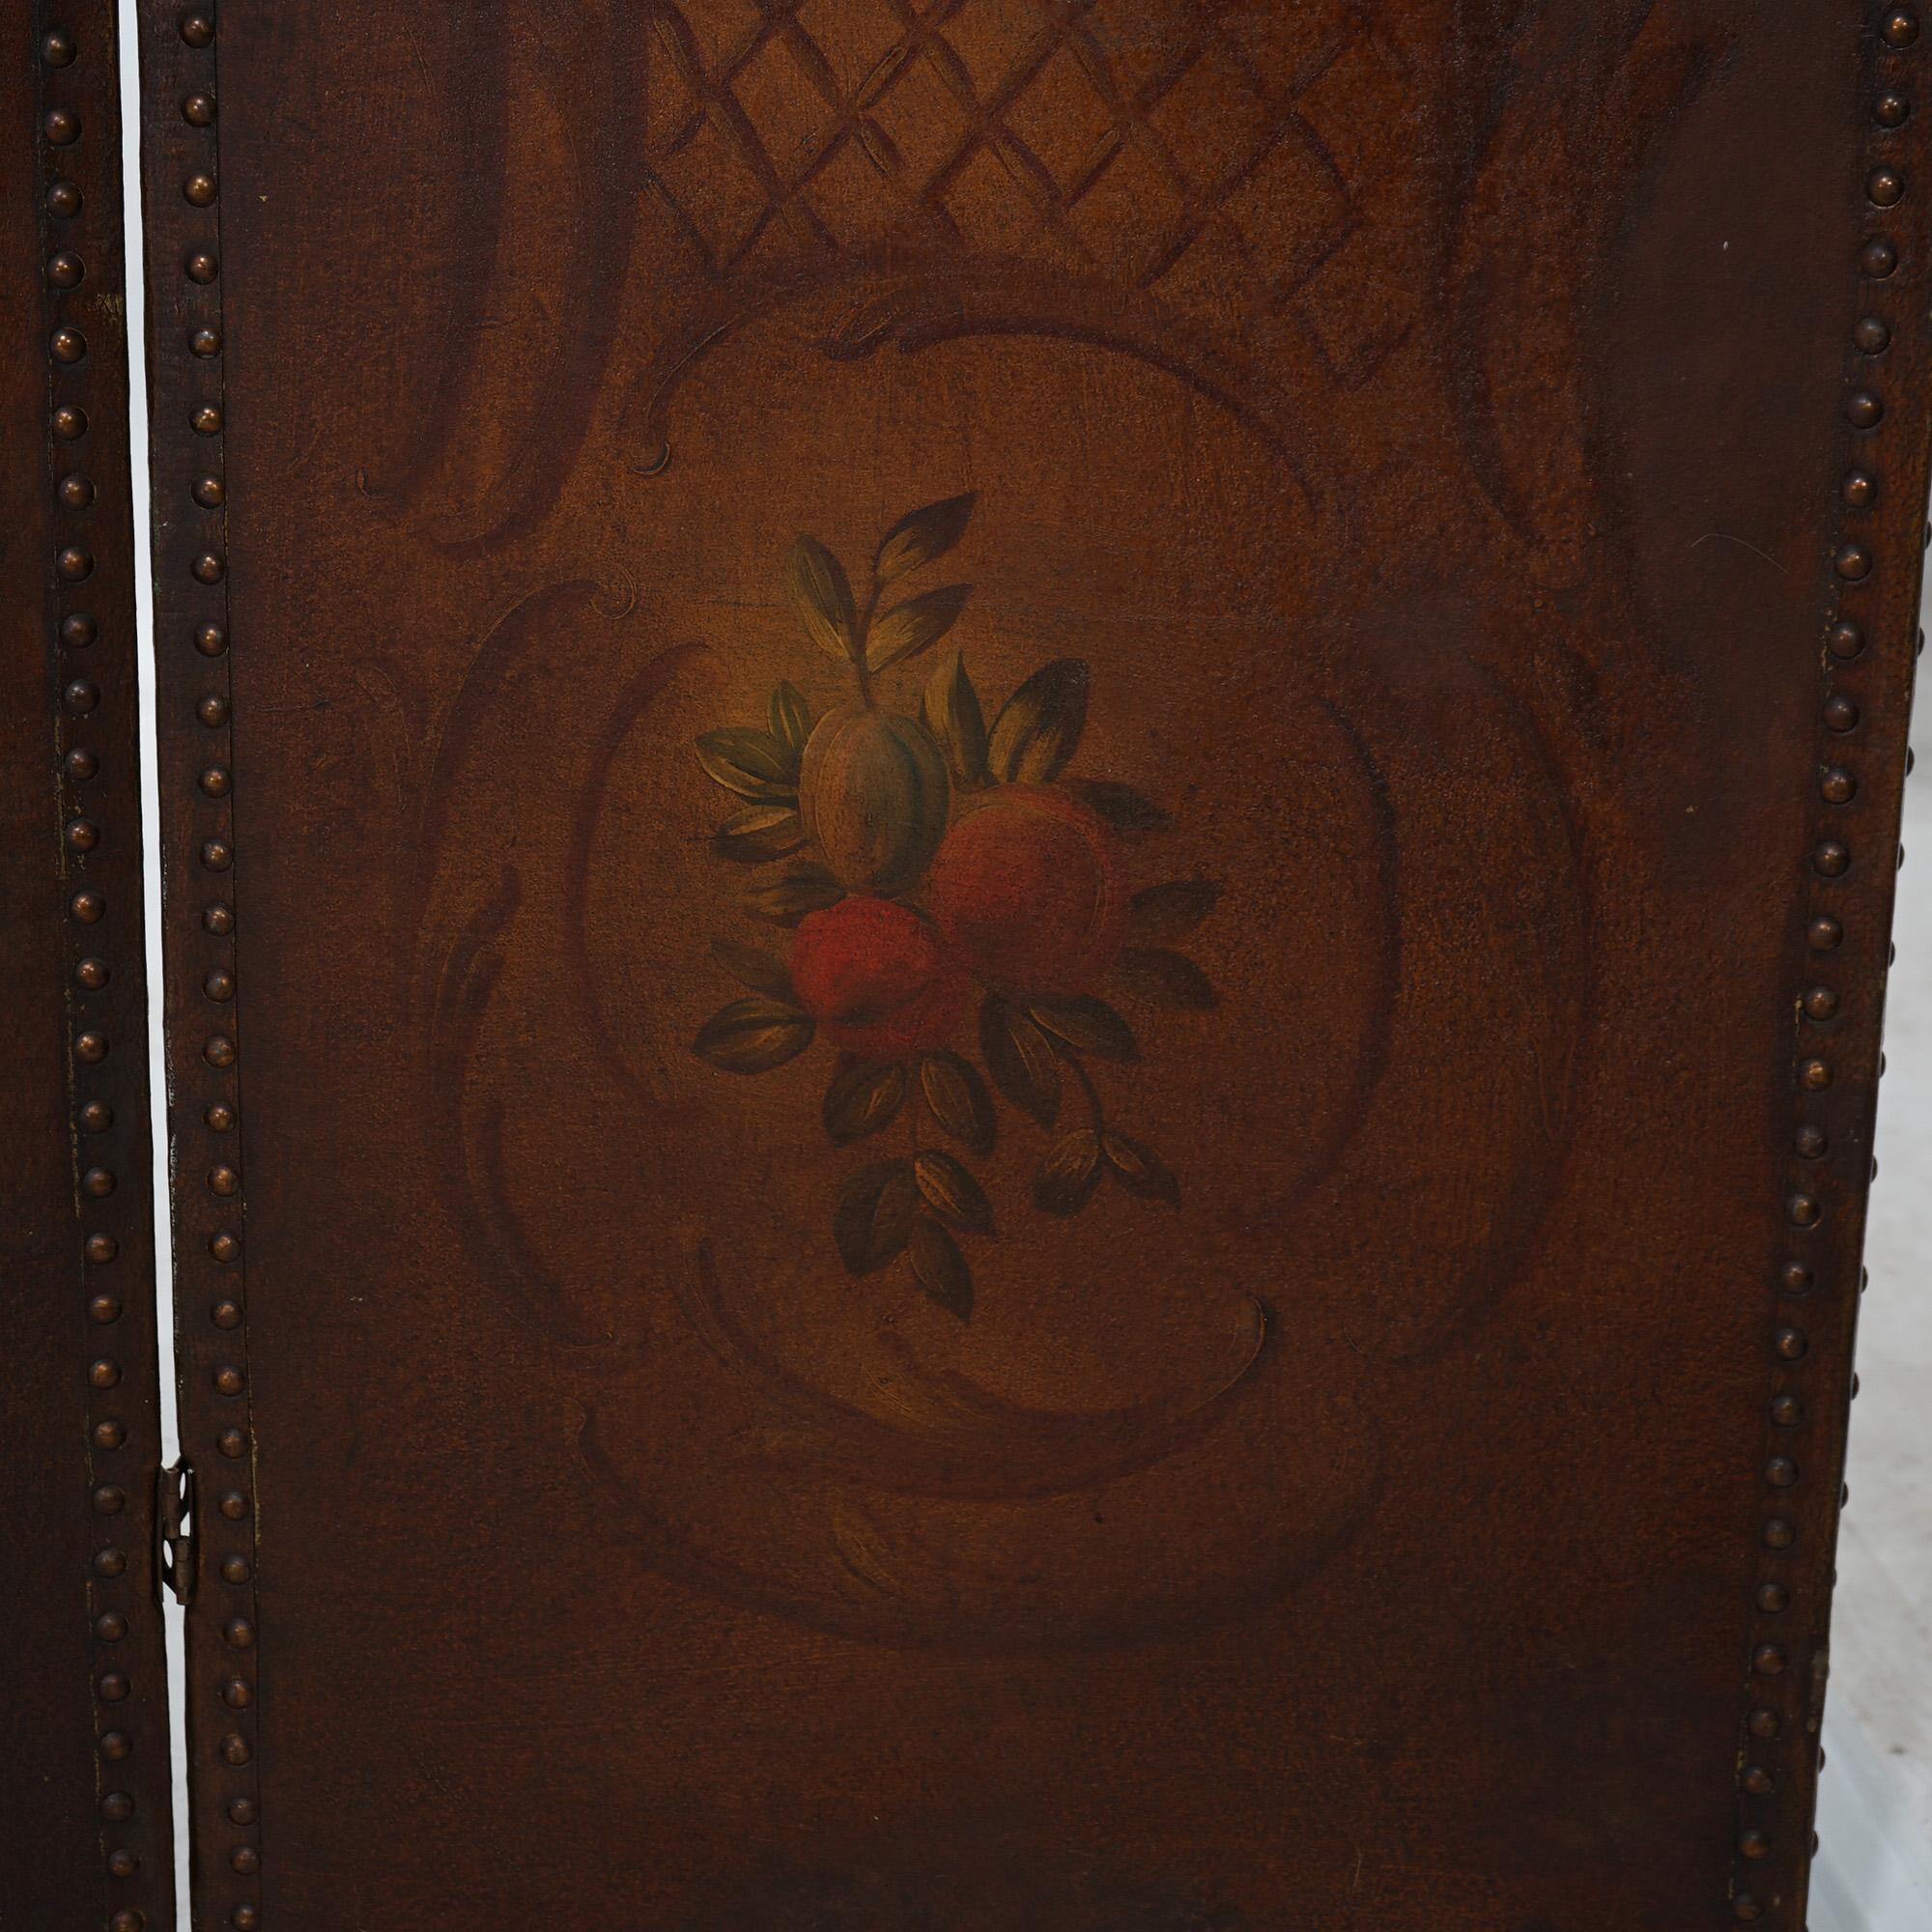 Arts and Crafts Antique Arts & Crafts Leather Folding Screen with Polychromed Floral Design